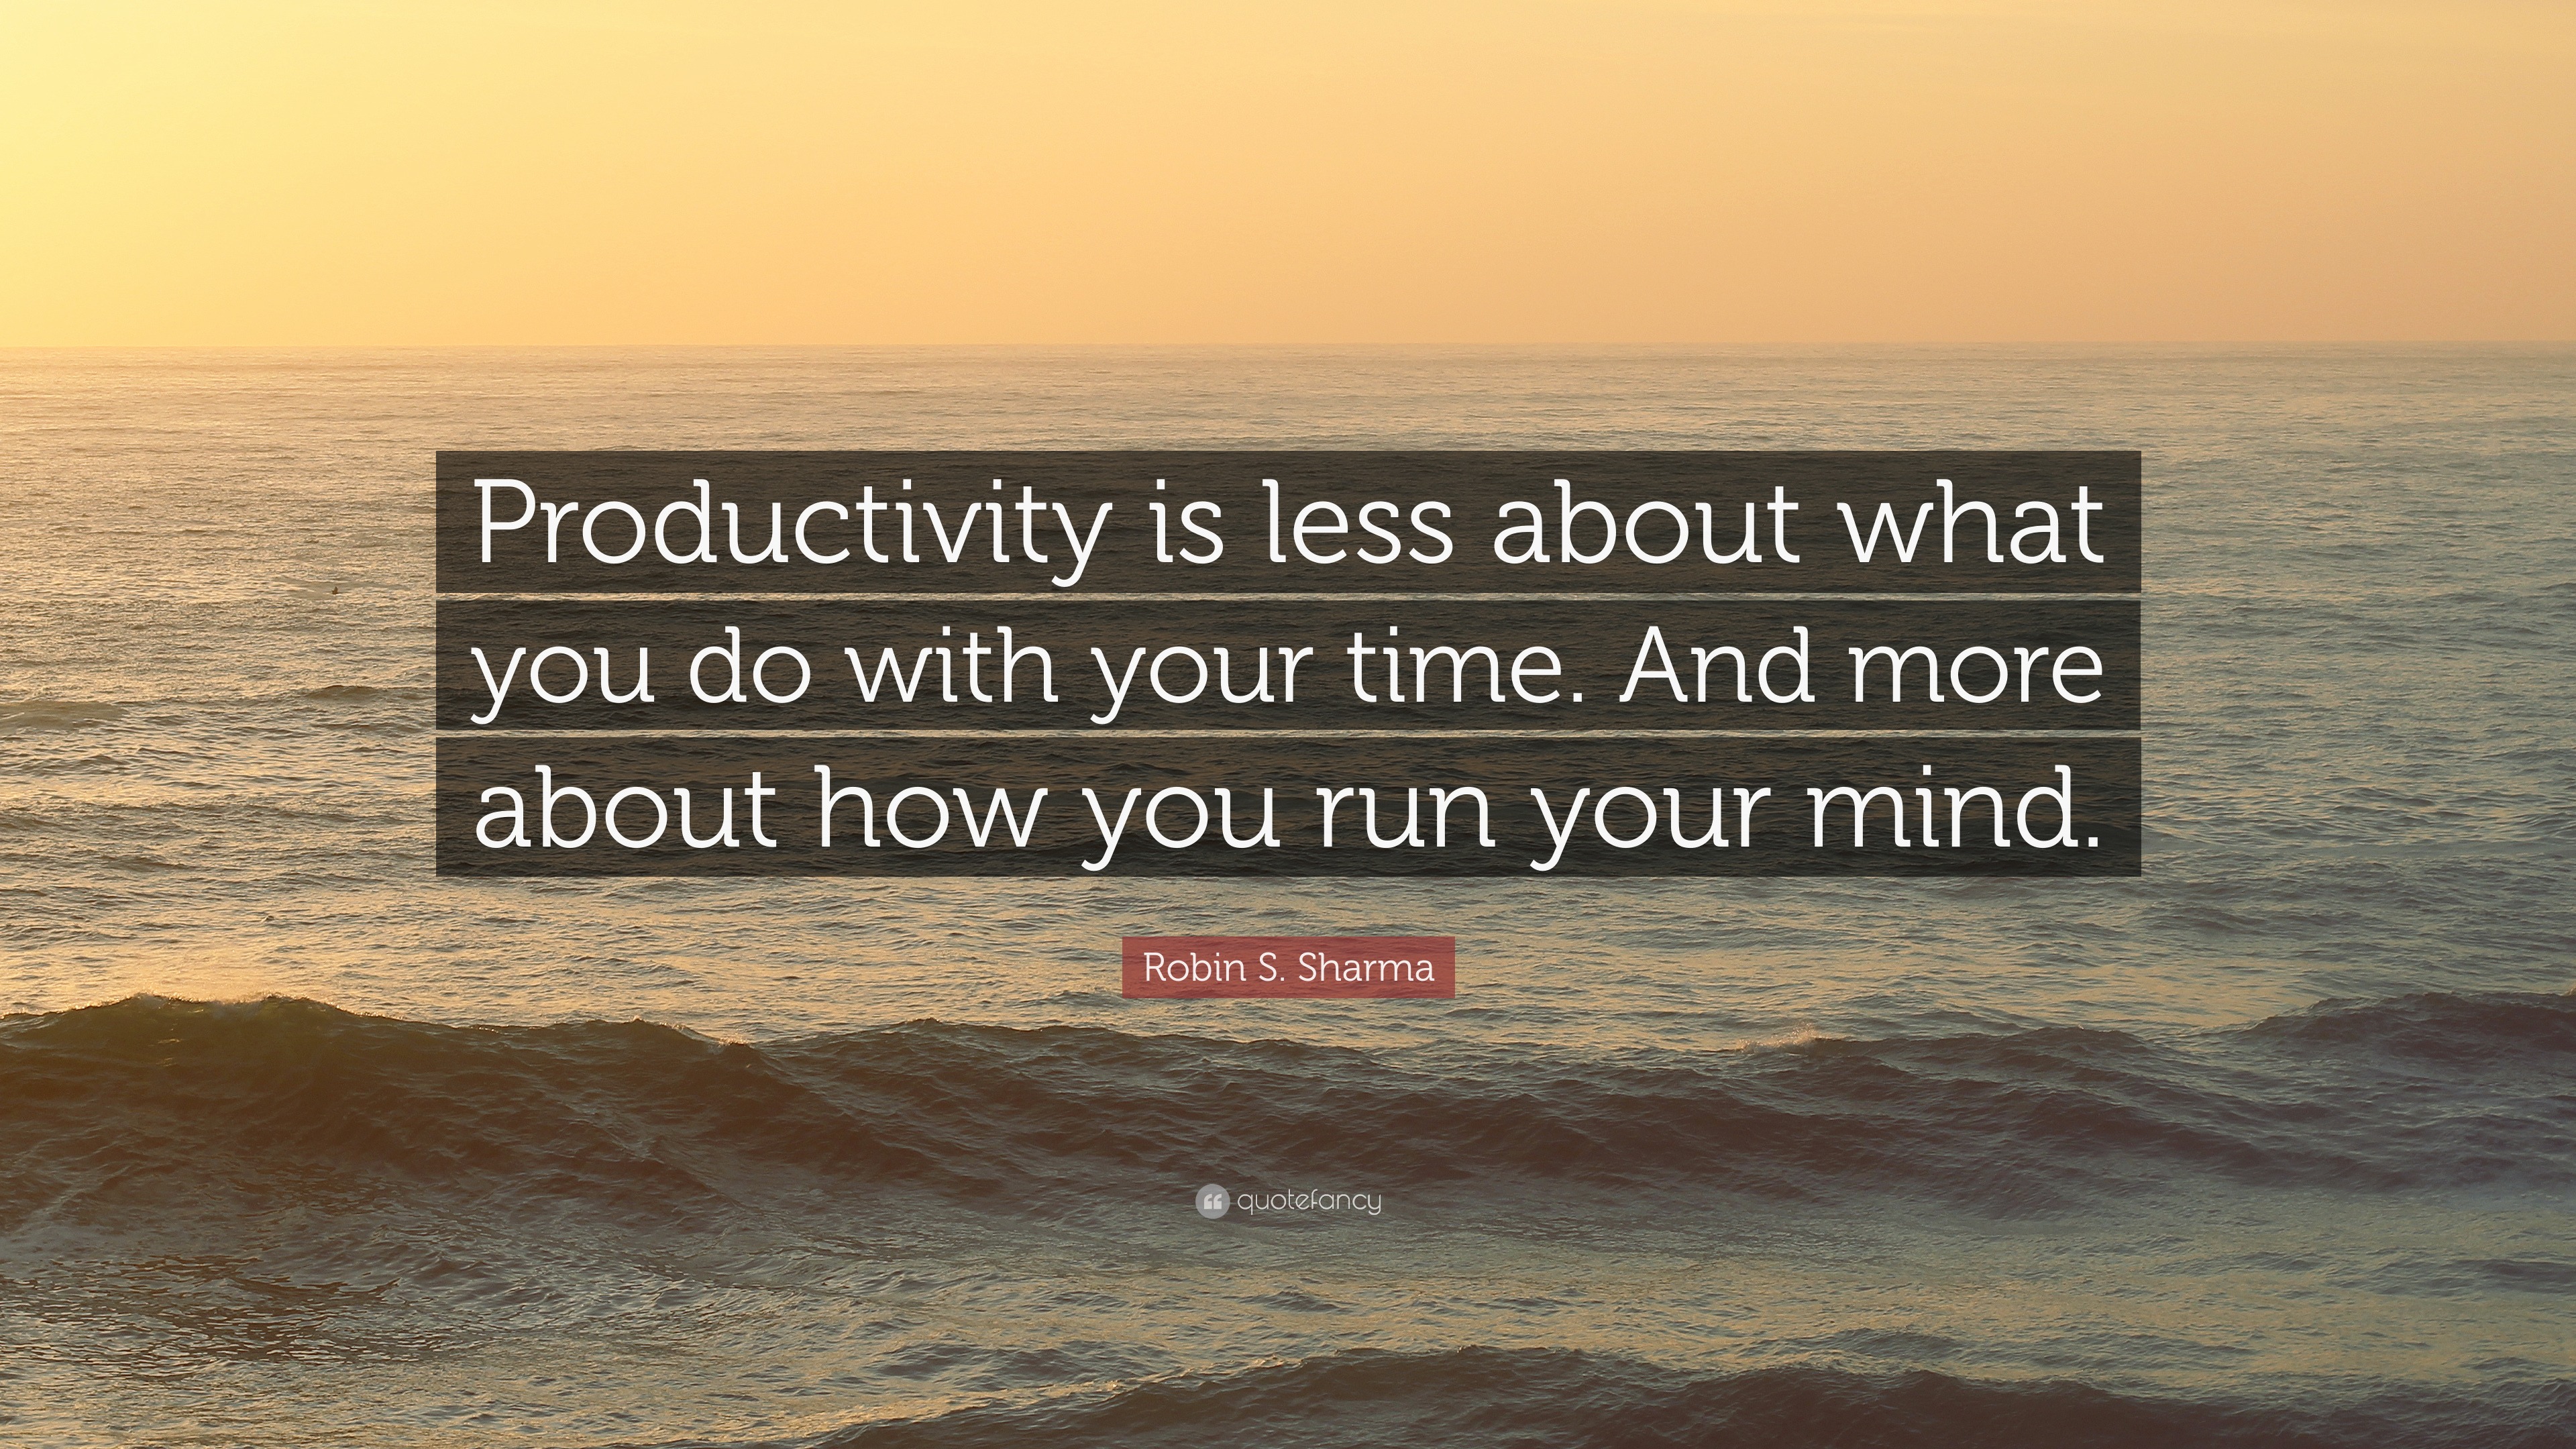 Robin S. Sharma Quote “Productivity is less about what